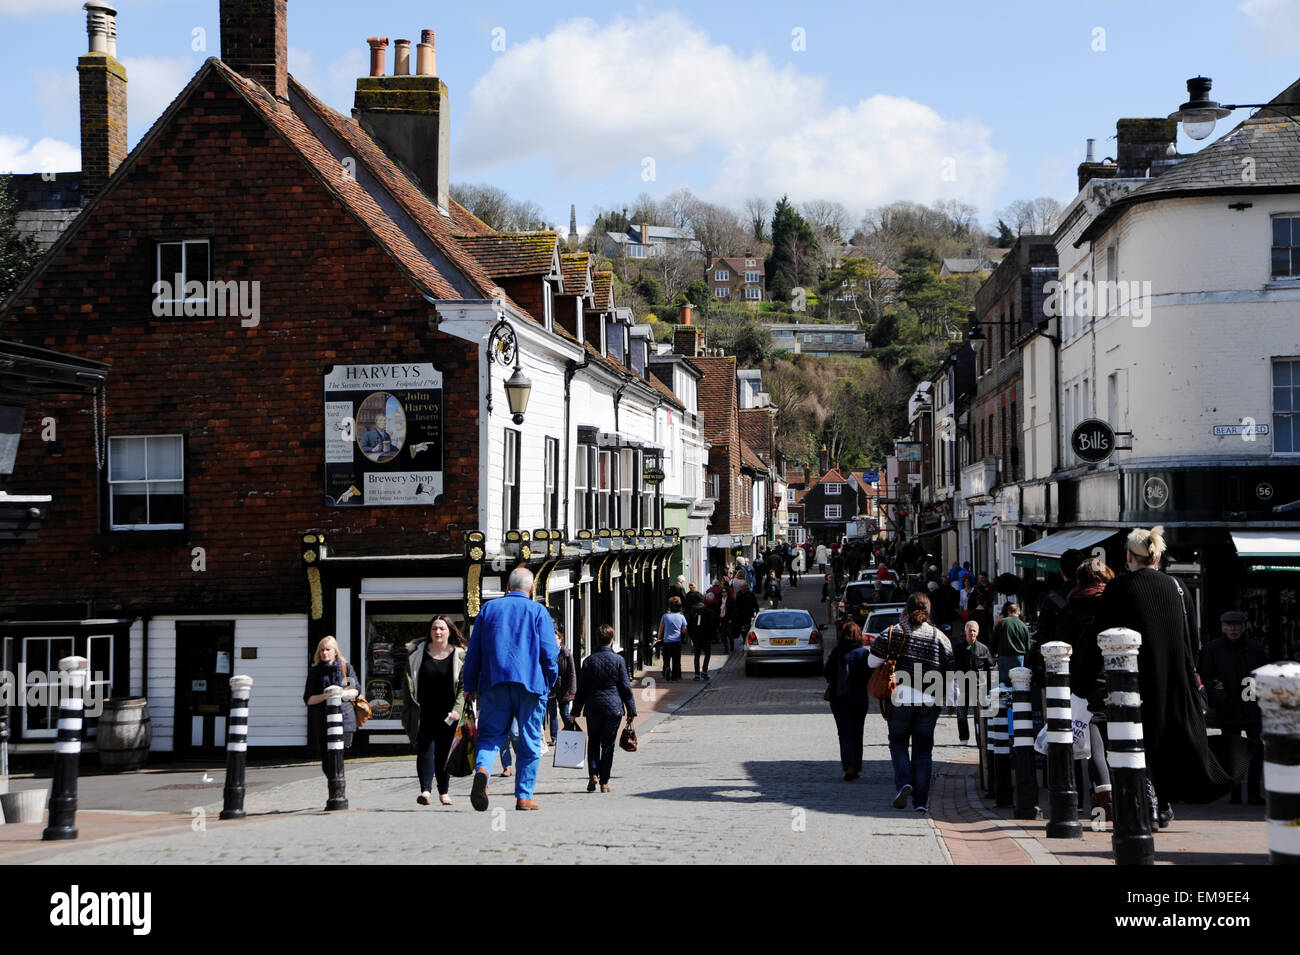 View looking down Cliffe High Street Lewes East Sussex UK Stock Photo